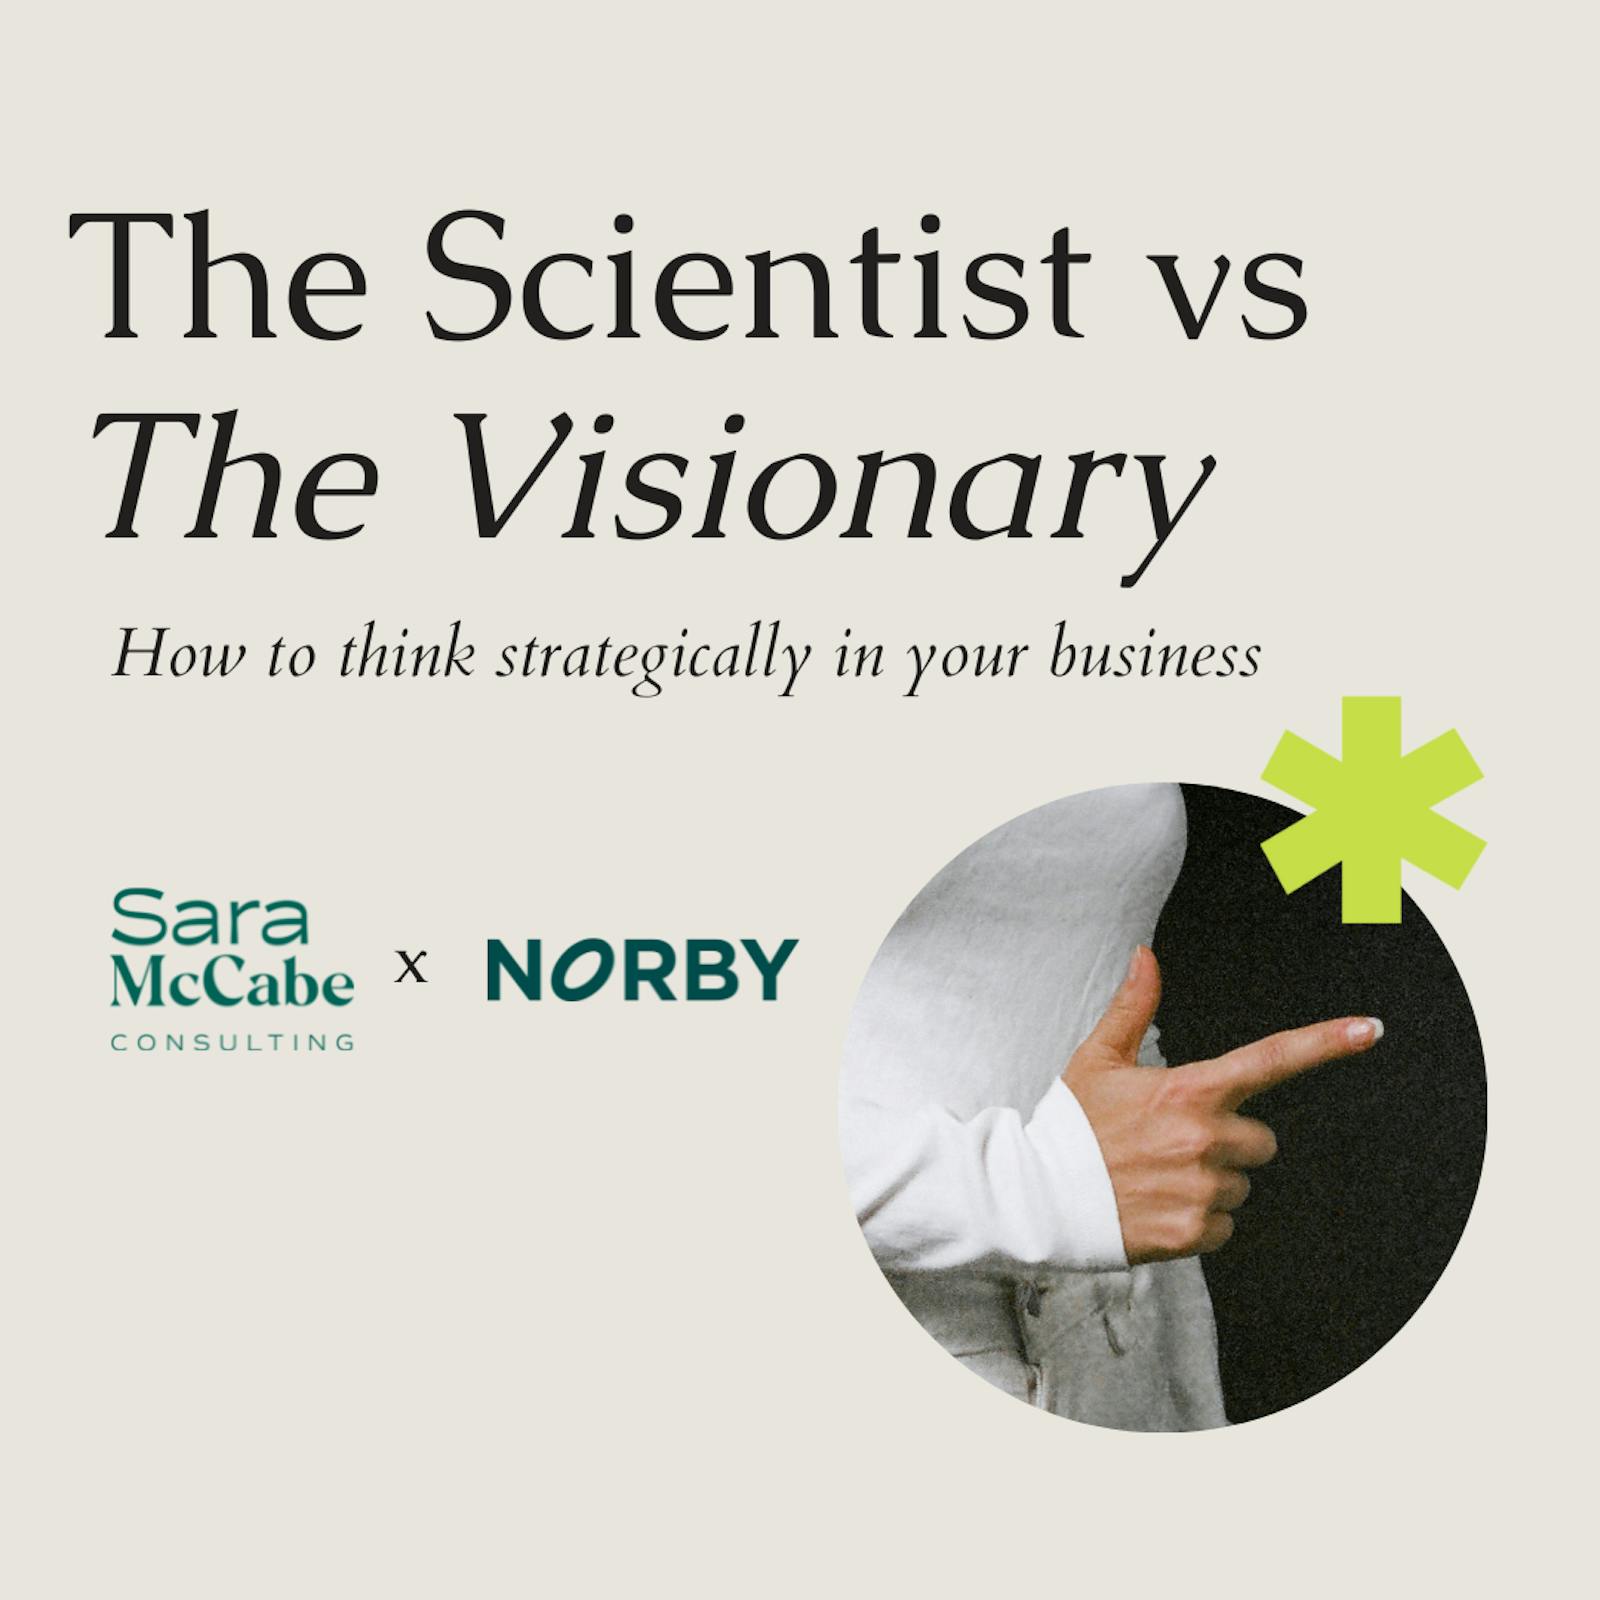 The Scientist vs The Visionary